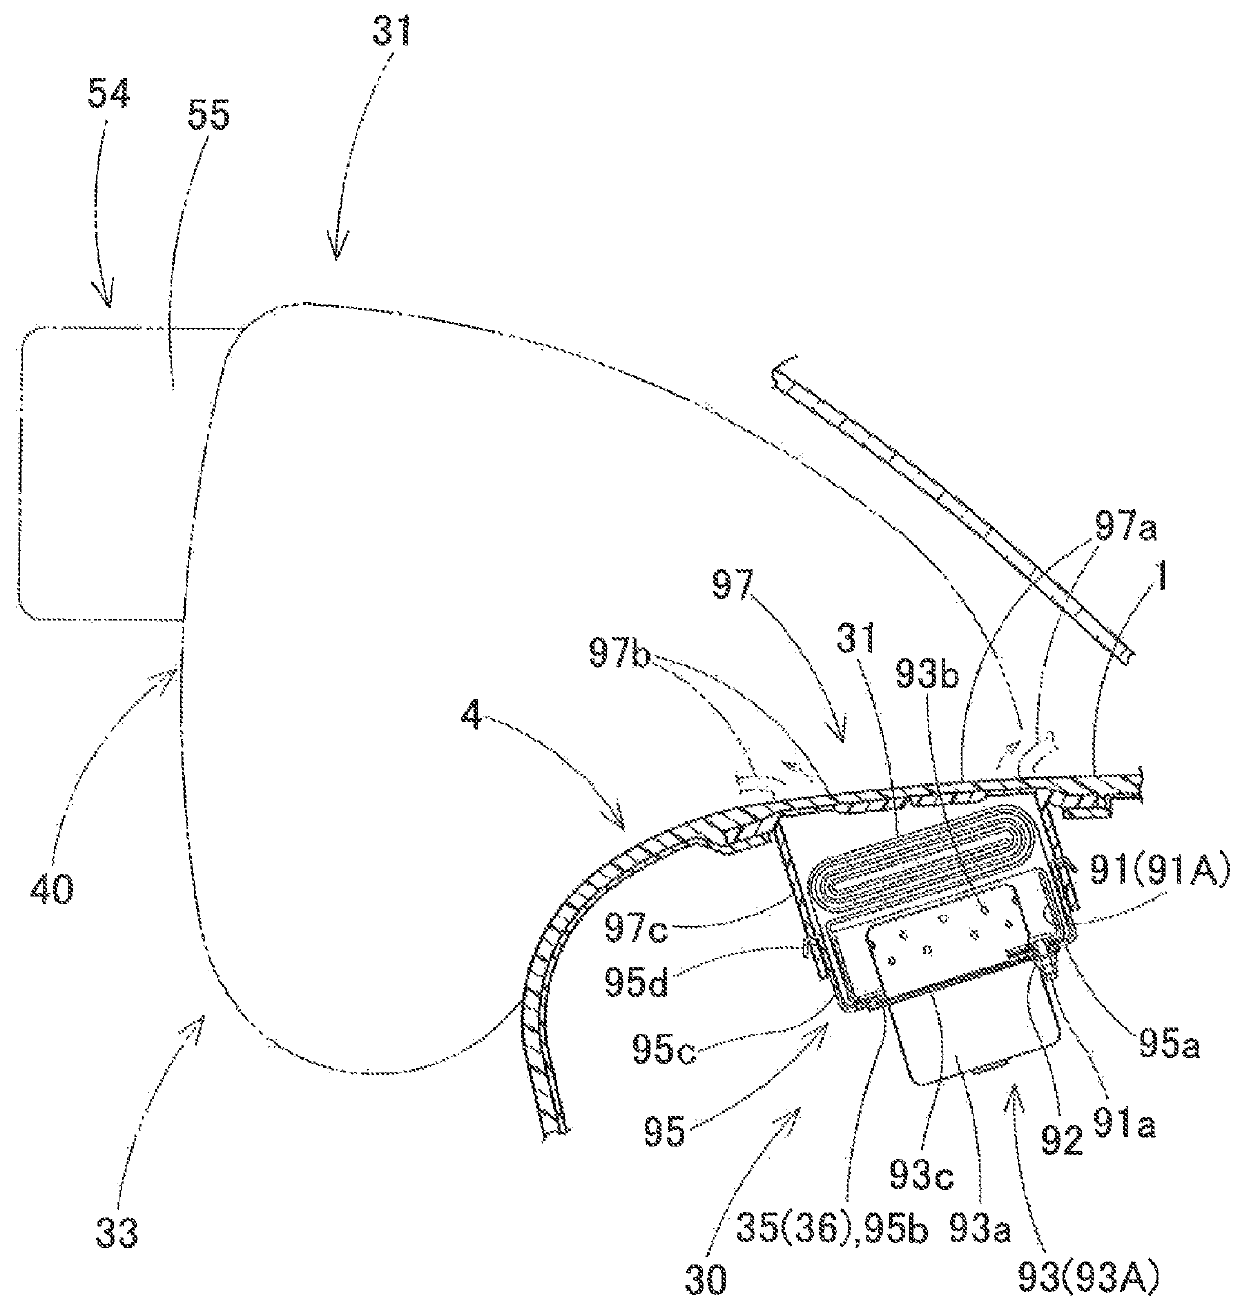 Airbag device for a front passenger seat